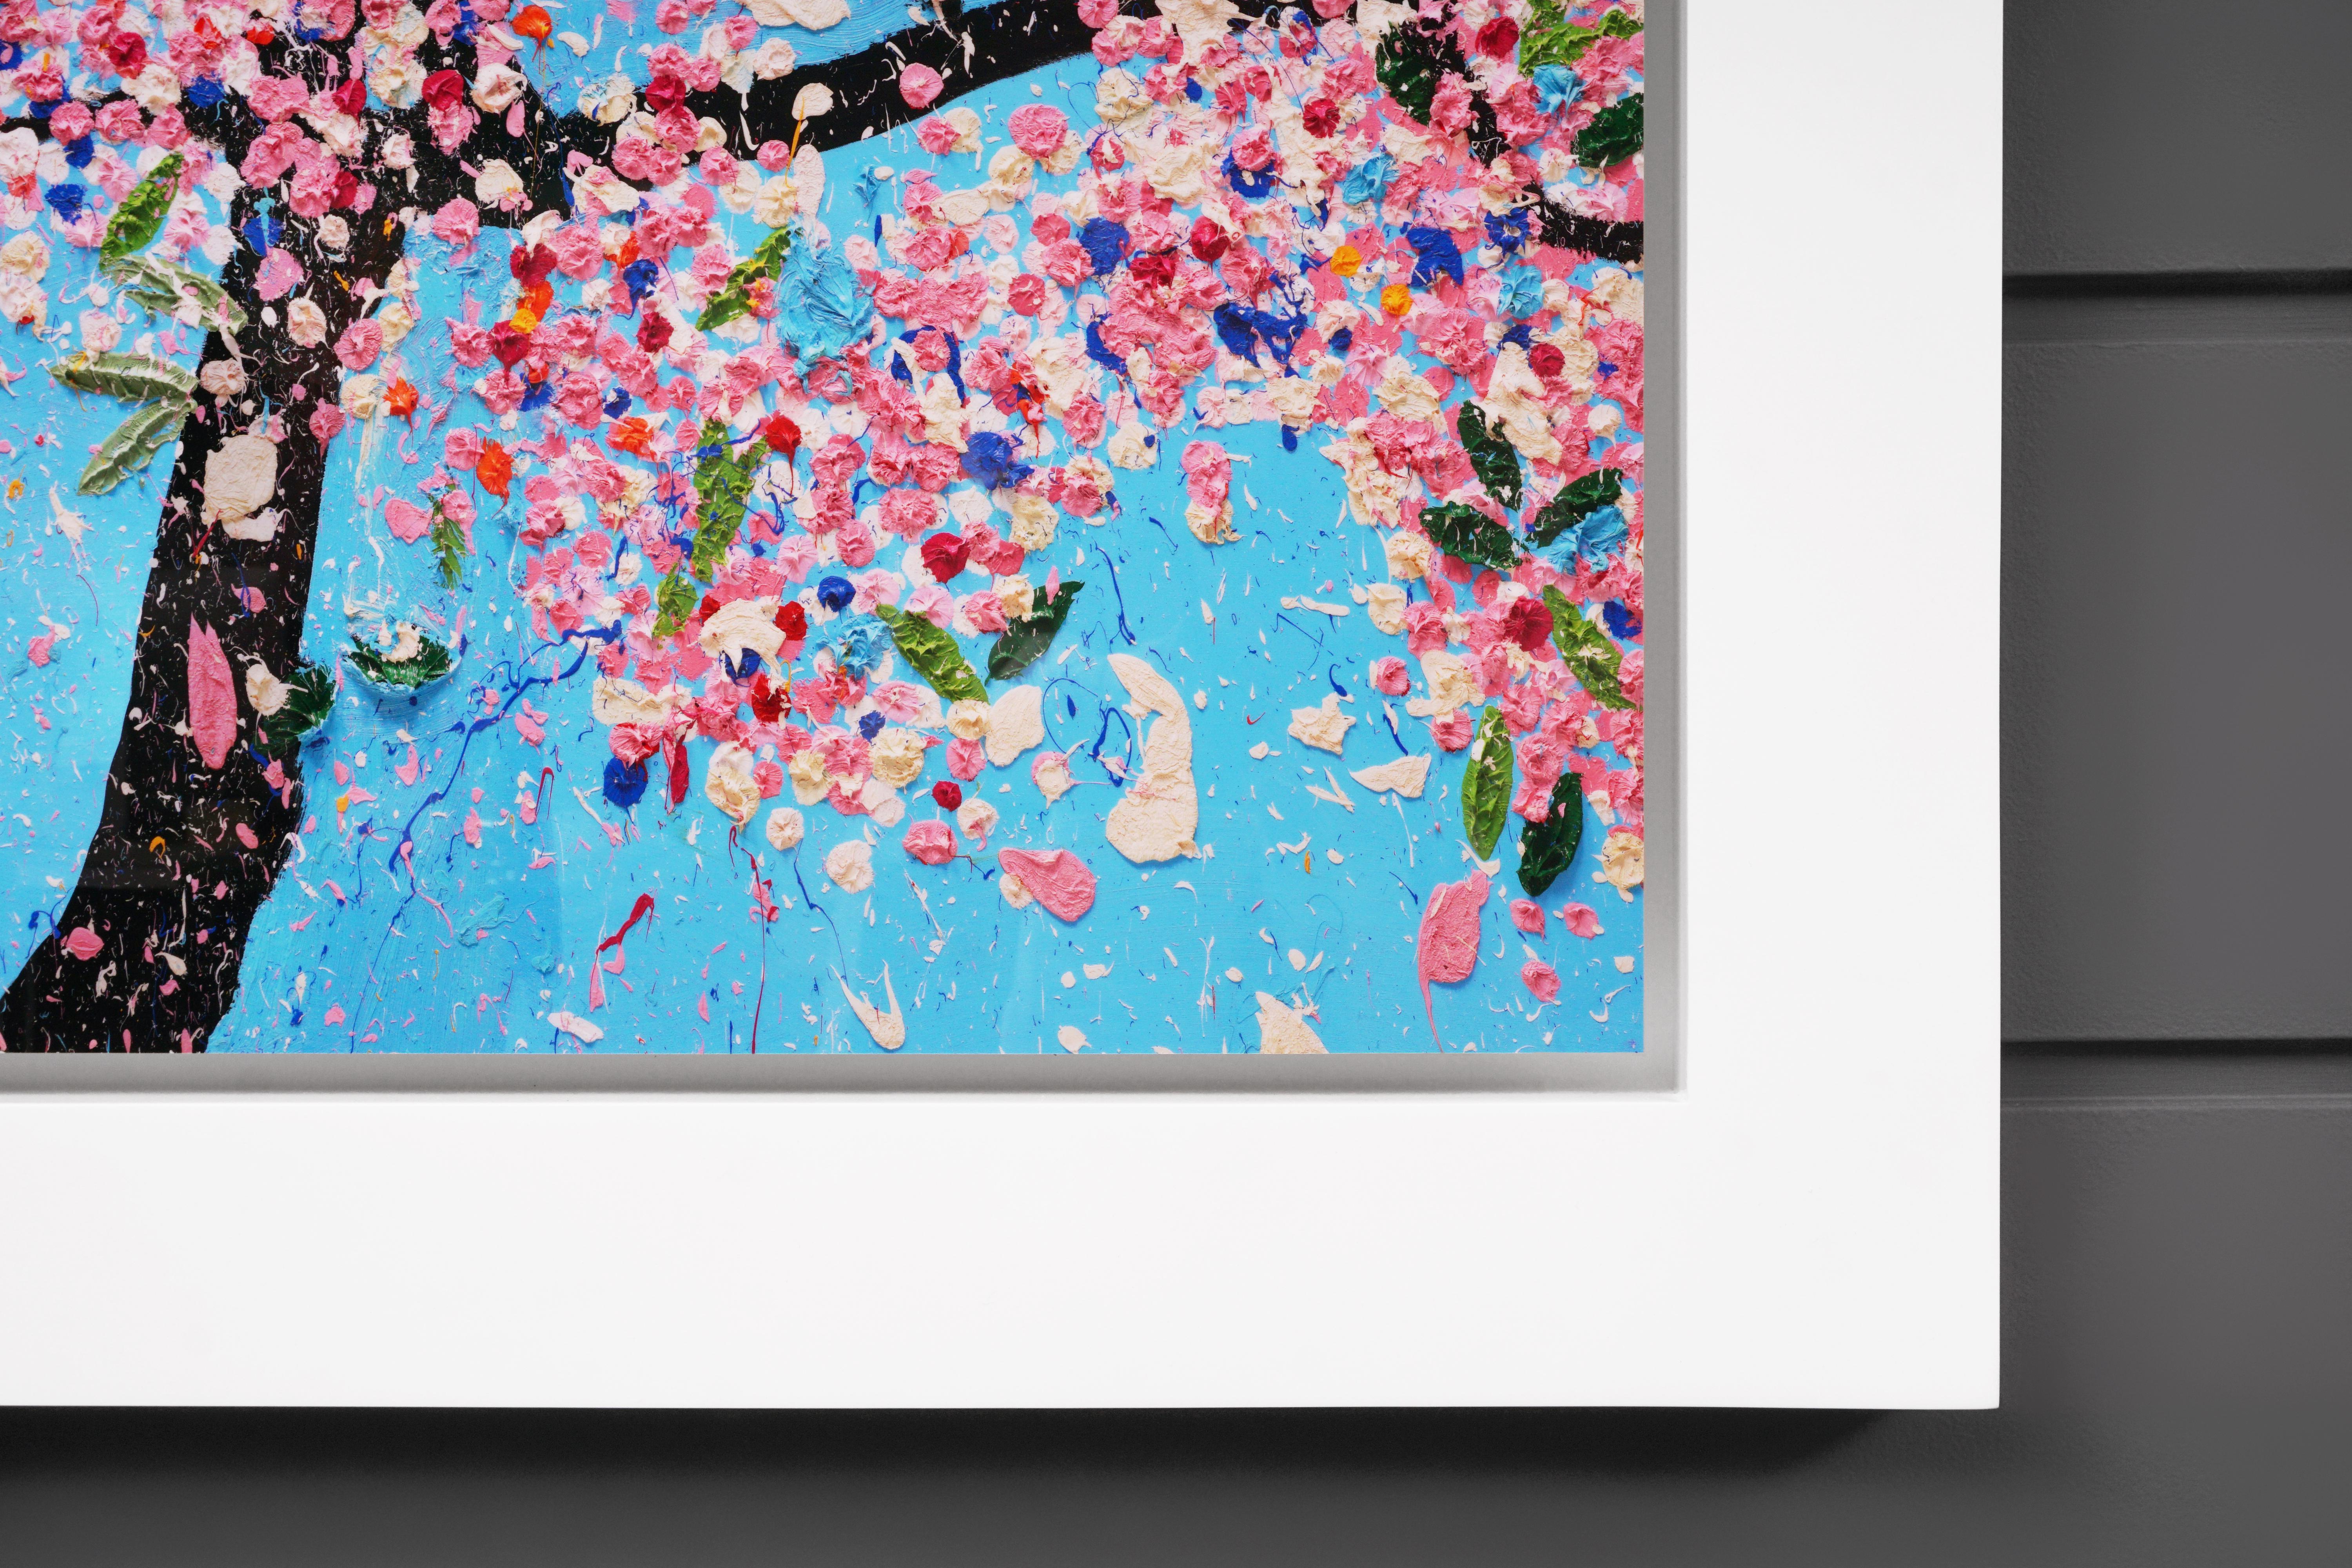 The Virtues 'Politeness', Limited Edition 'Cherry Blossom' Landscape, 2021 - Gray Print by Damien Hirst